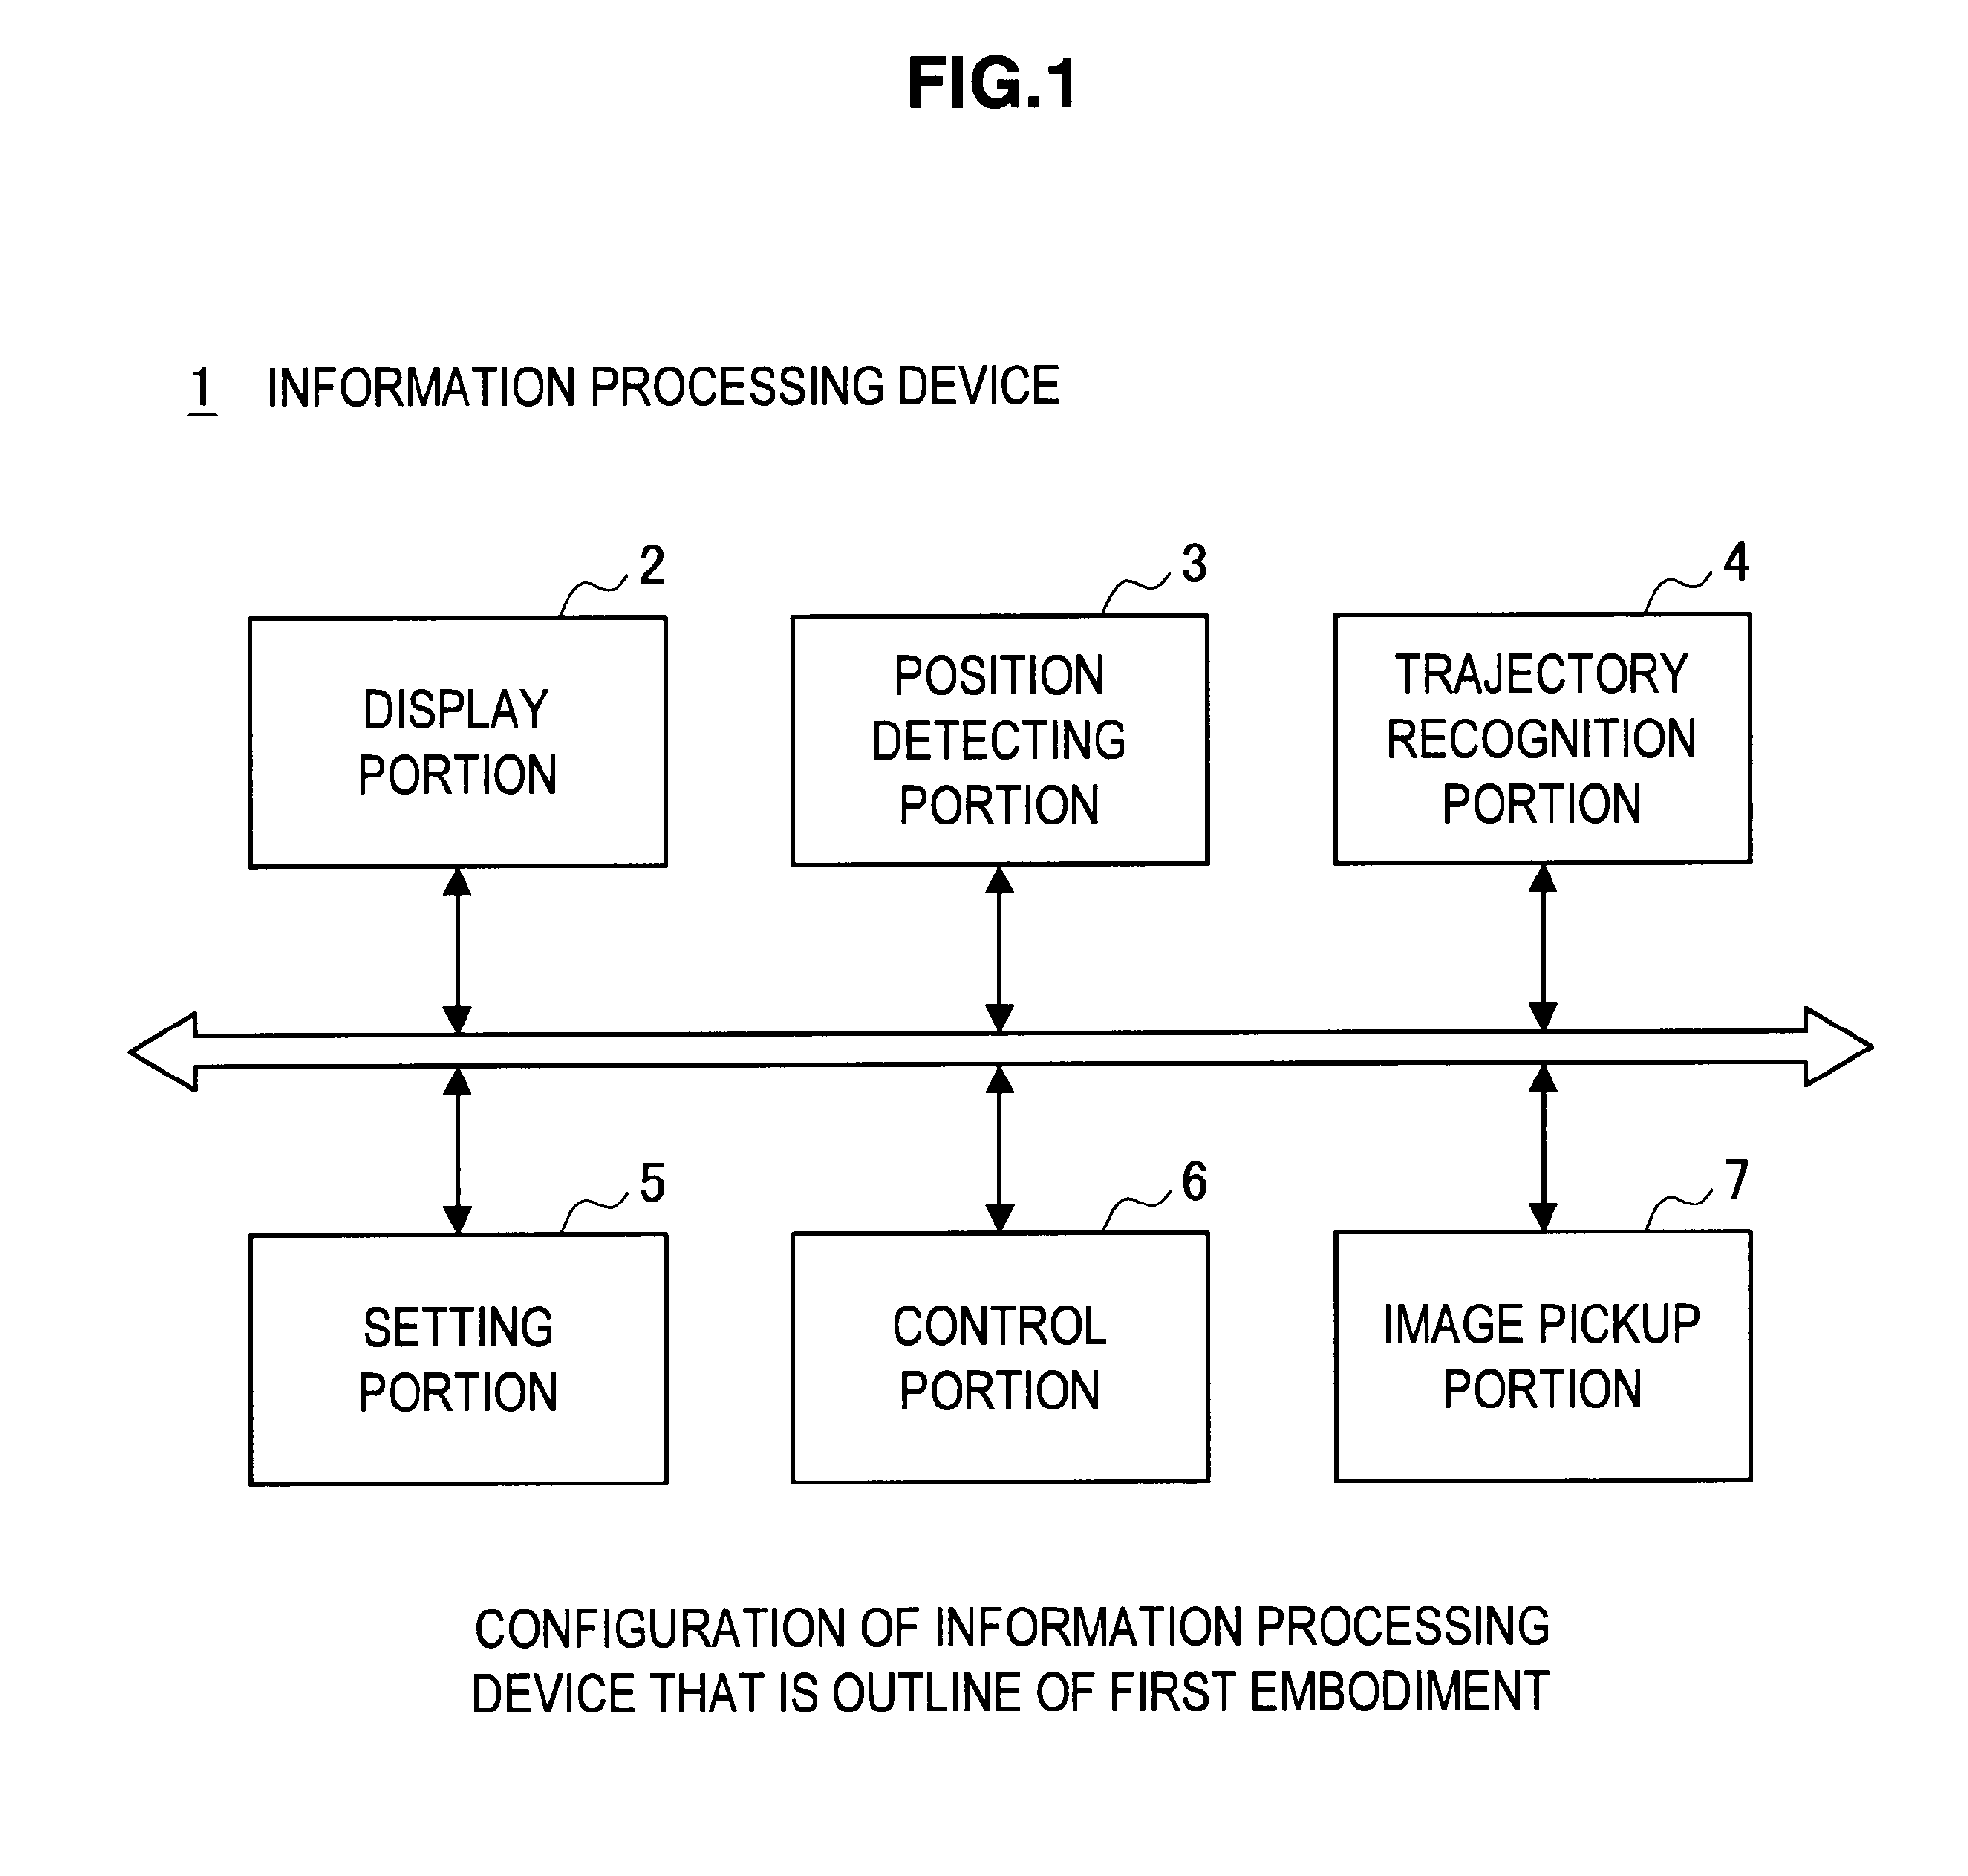 Digital image processing device and associated methodology of performing touch-based image scaling